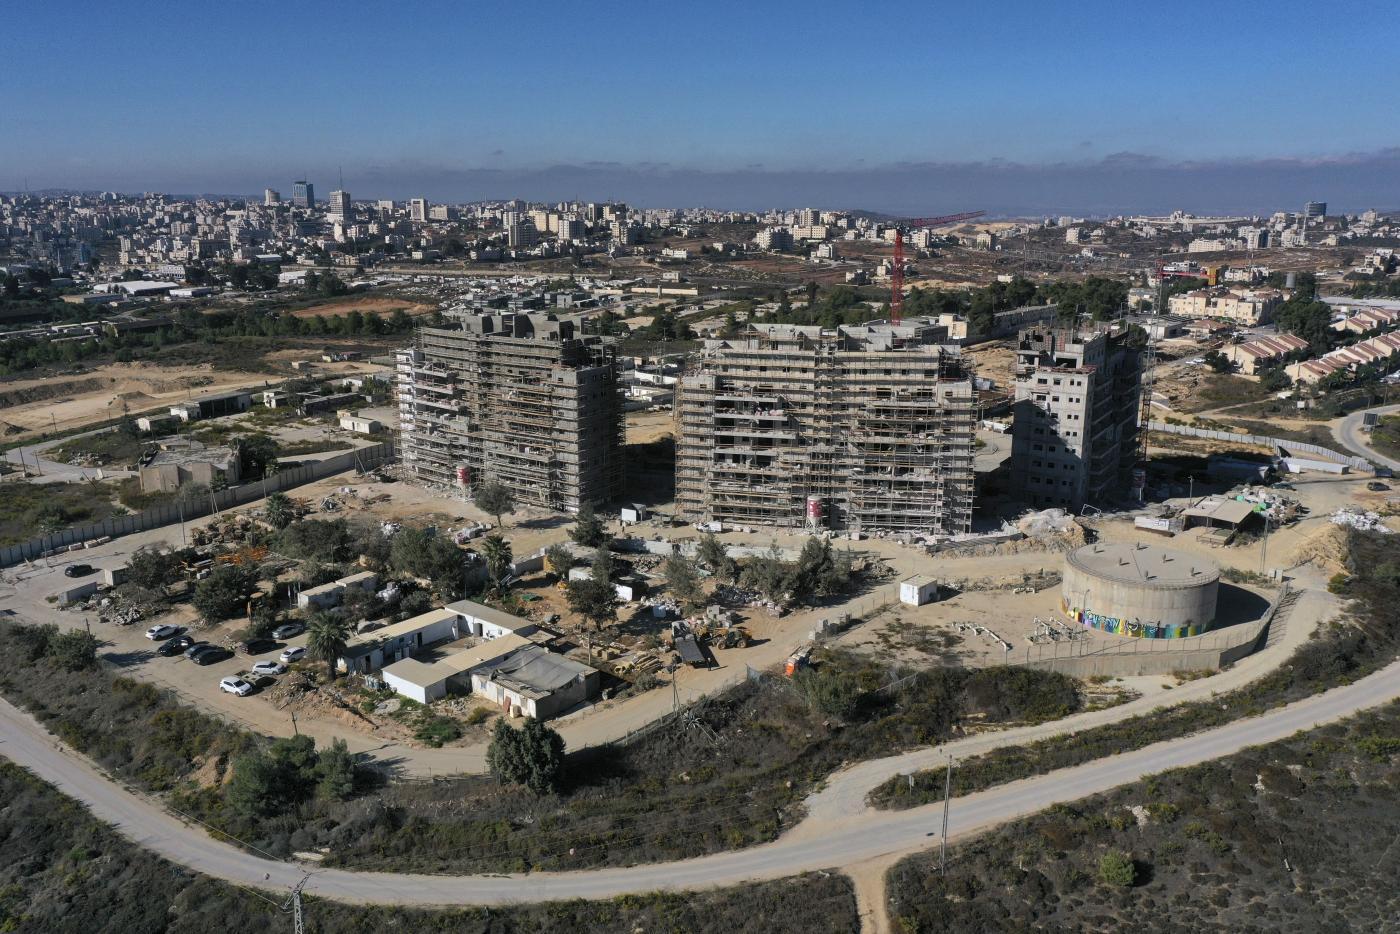 Normalization Dividend: More Israeli Settlements In Occupied Territories, Palestinian Homes Demolished